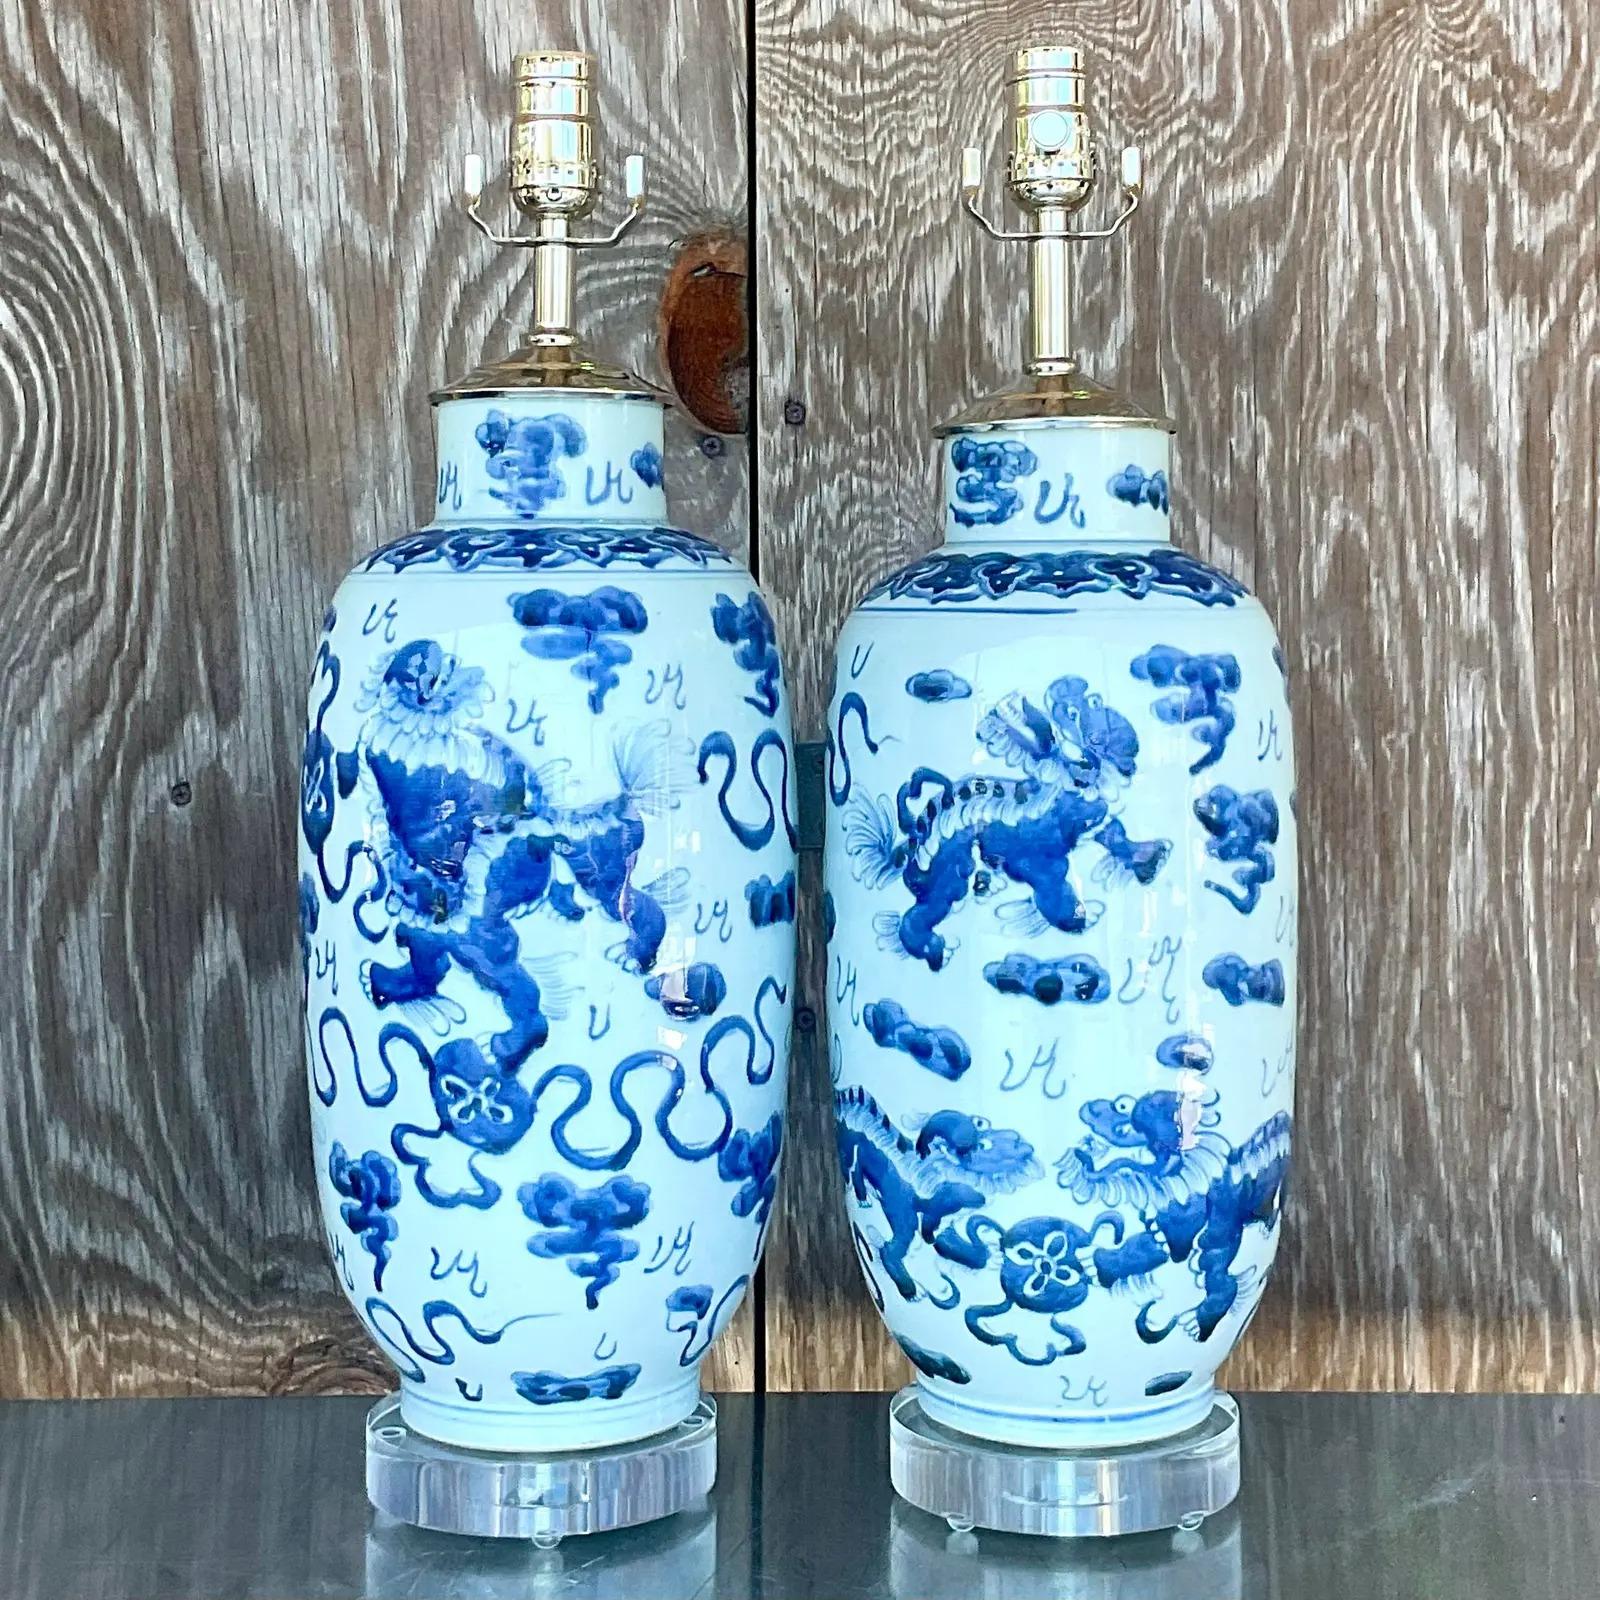 Fantastic pair of vintage Chinese blue and white table lamps. Beautiful Foo Dog design with a high gloss glazed finish. Fully restored with all new wiring, hardware and lucite plinths. Acquired from a Palm Beach estate.